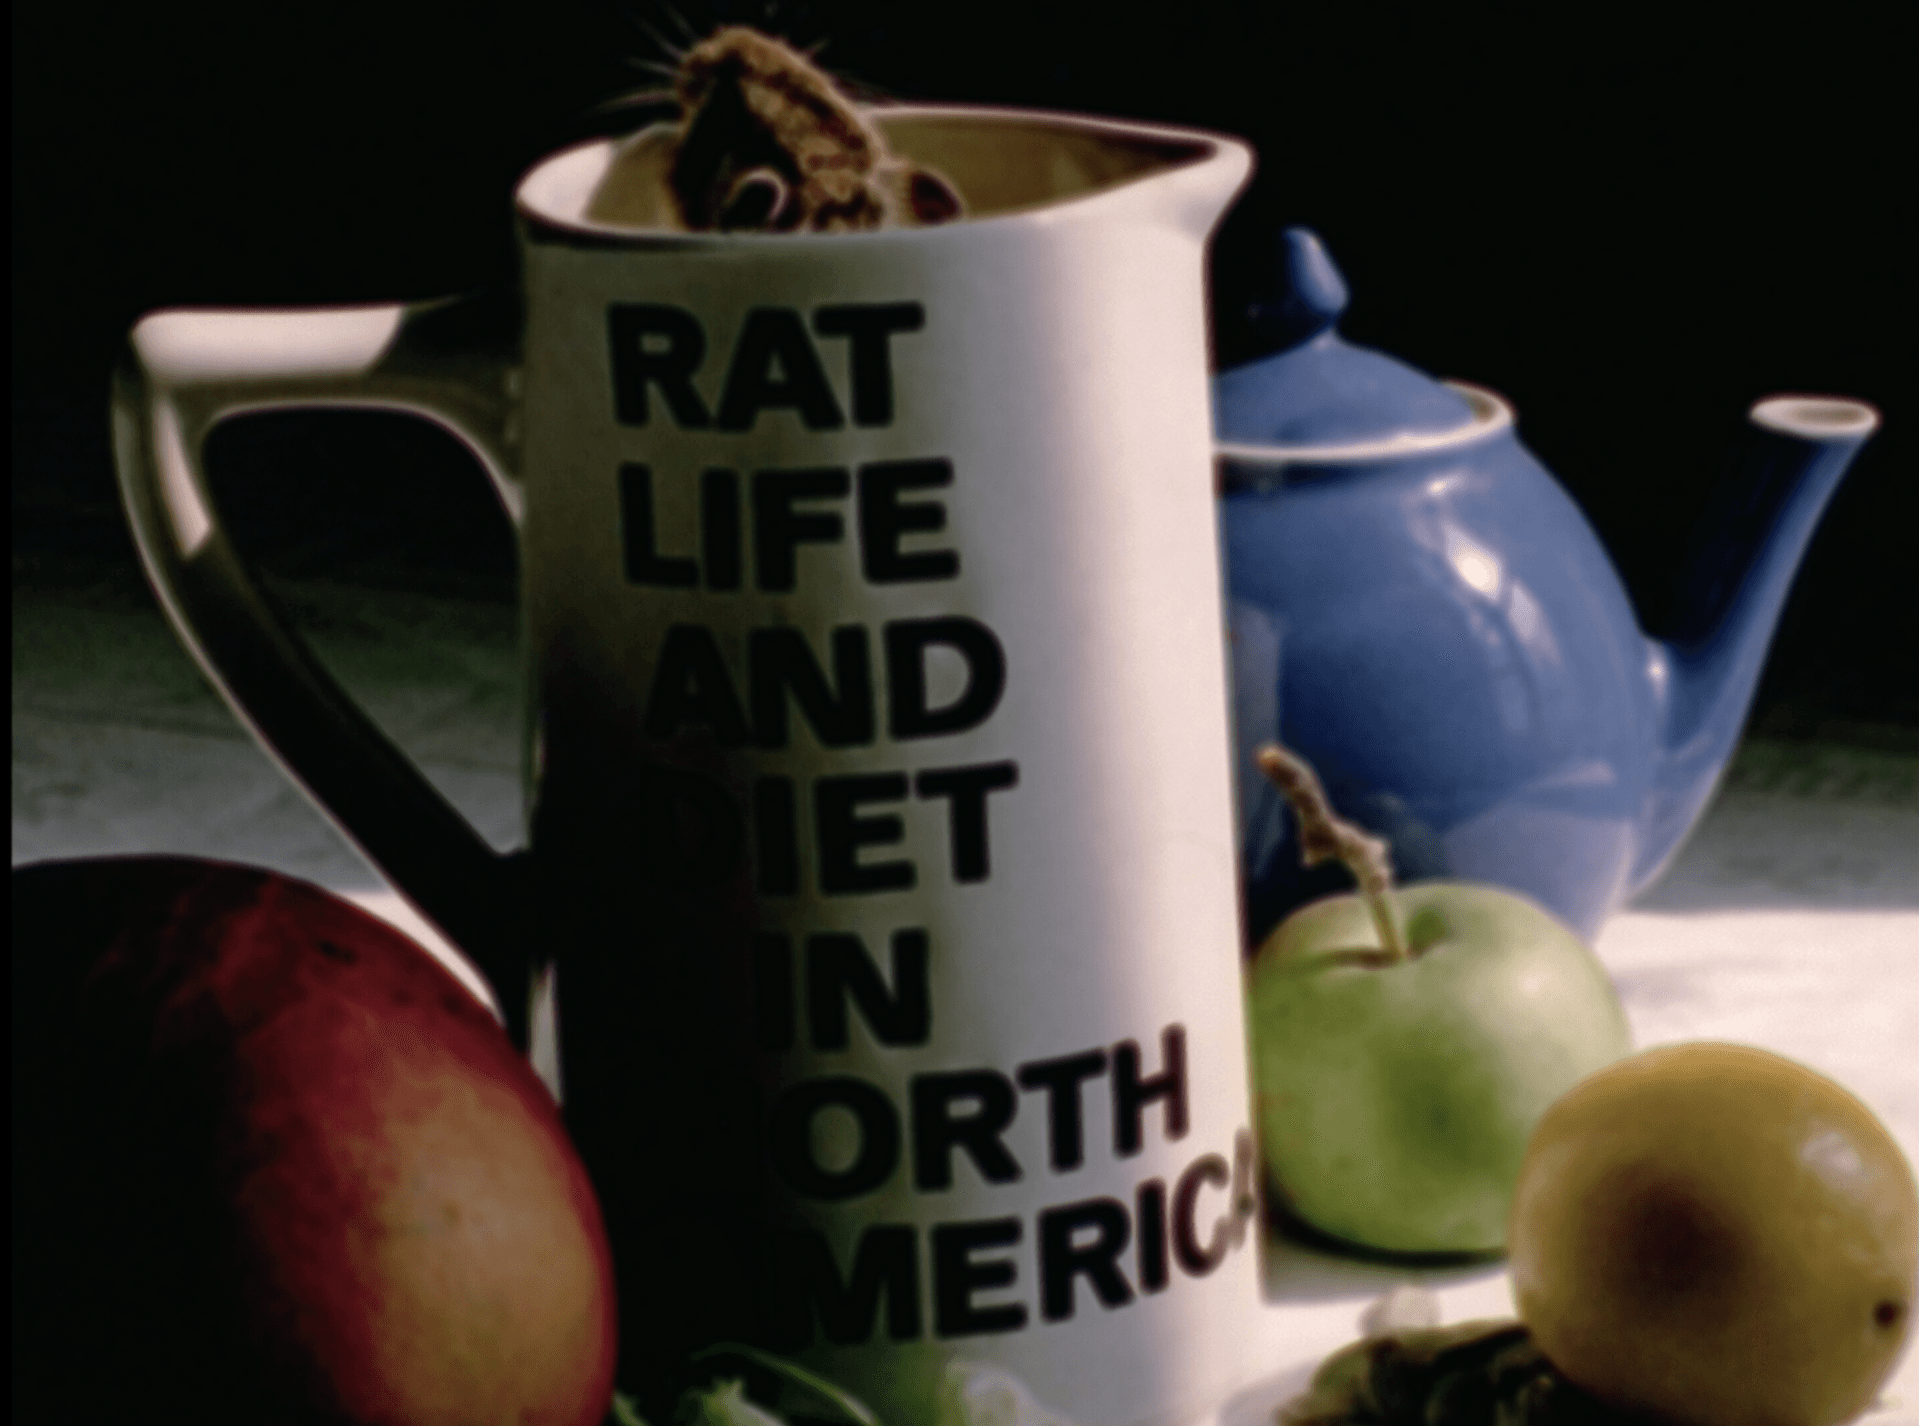 Rat Life and Diet 1